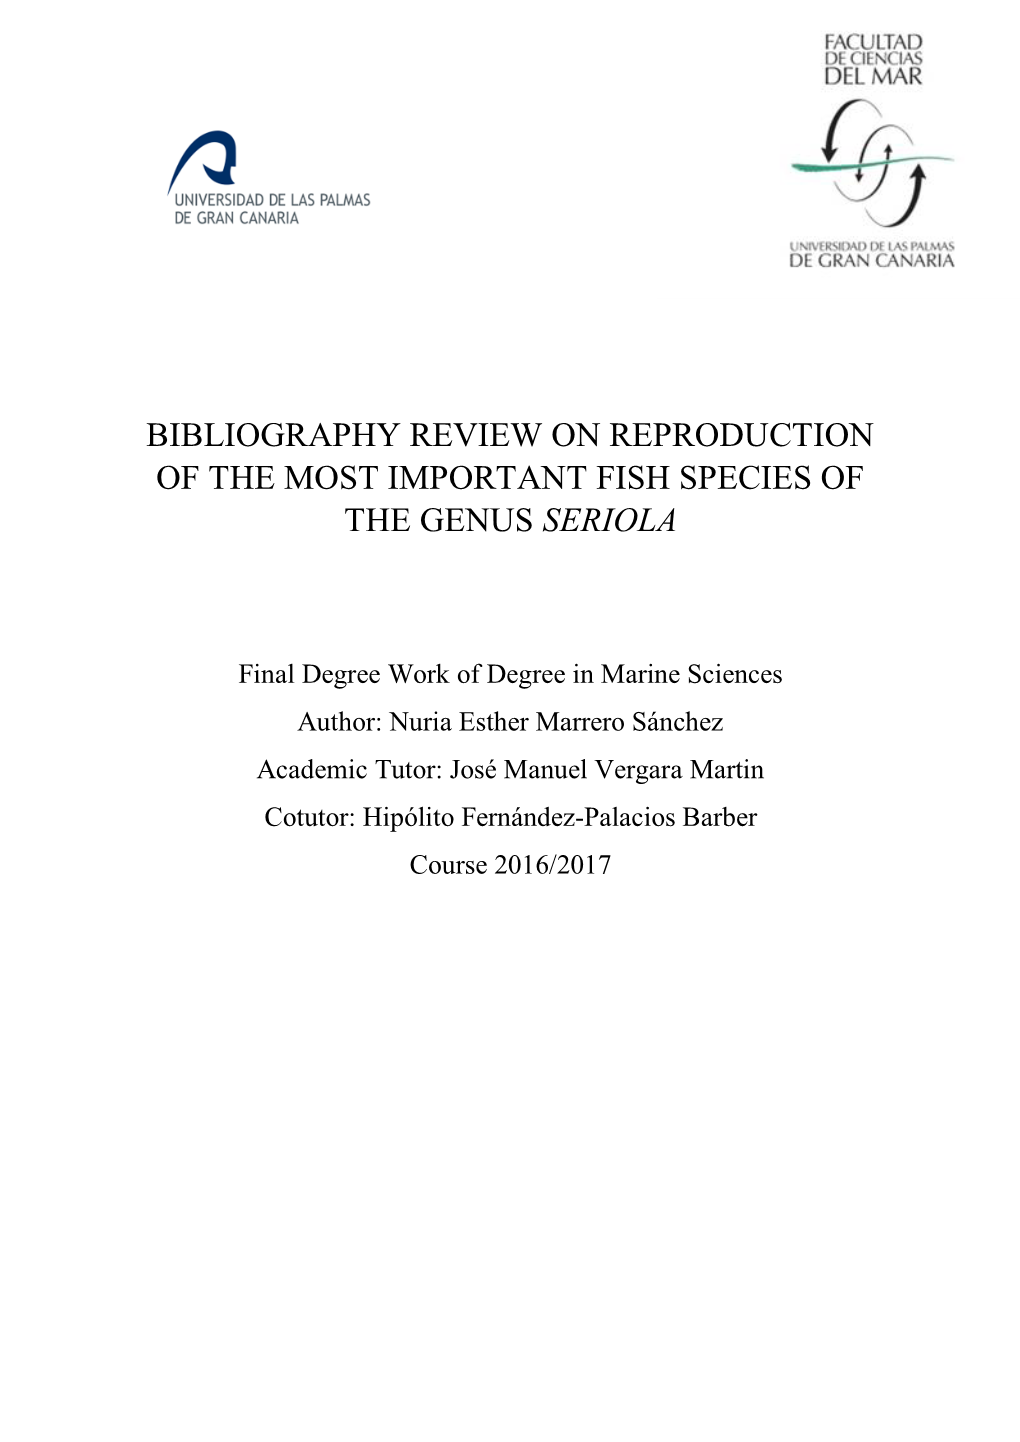 Bibliography Review on Reproduction of the Most Important Fish Species of the Genus Seriola